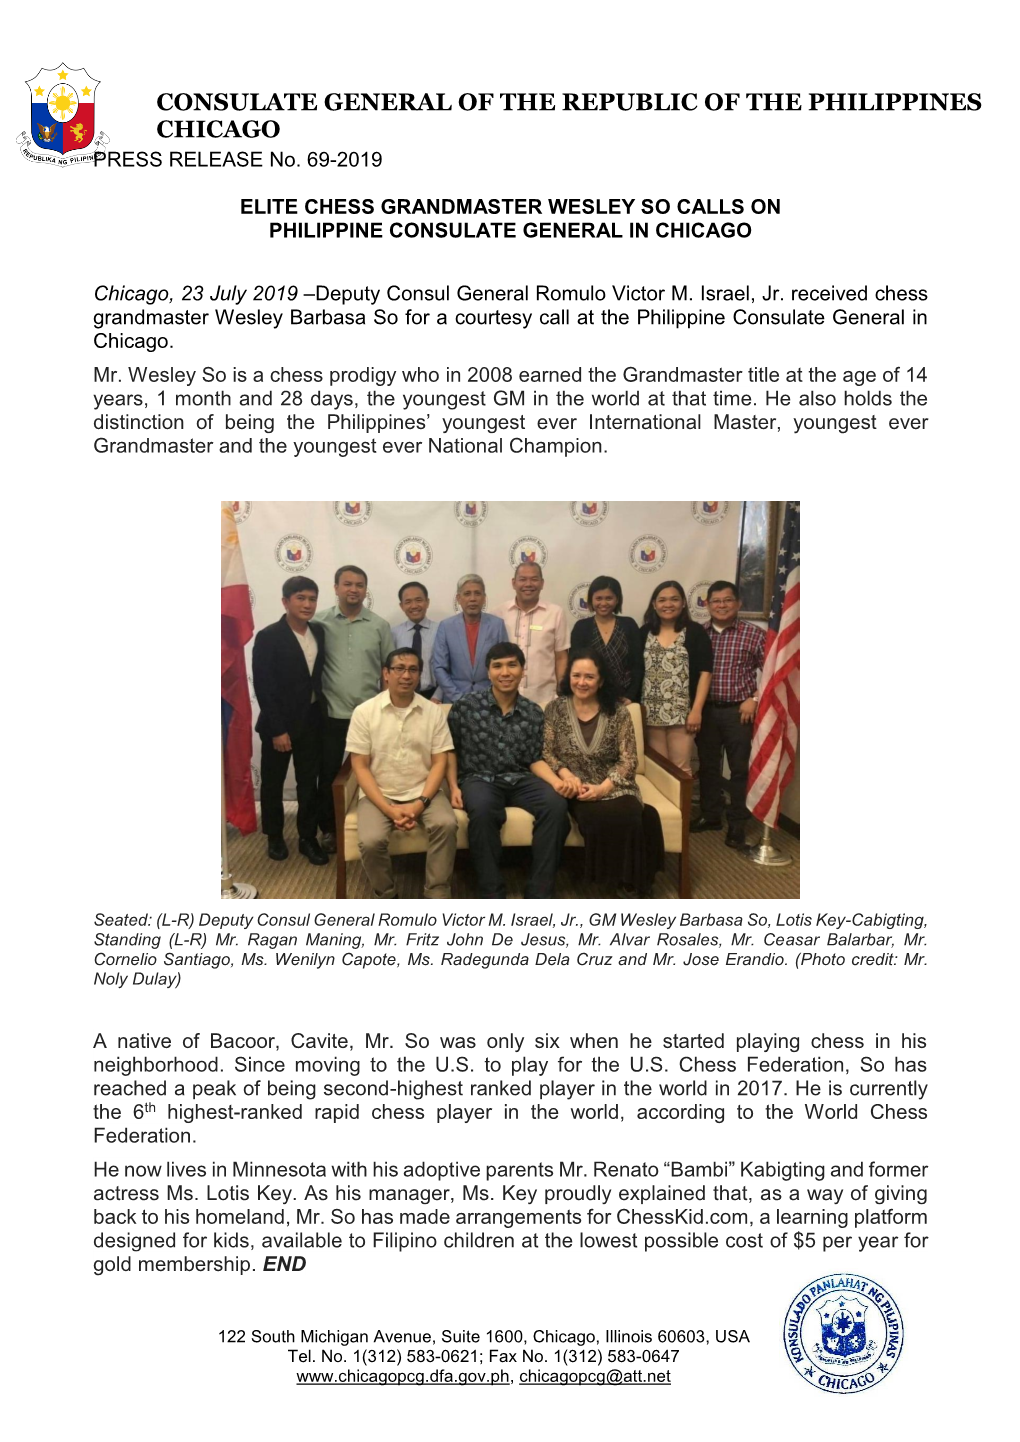 Elite Chess Grandmaster Wesley So Calls on Philippine Consulate General in Chicago